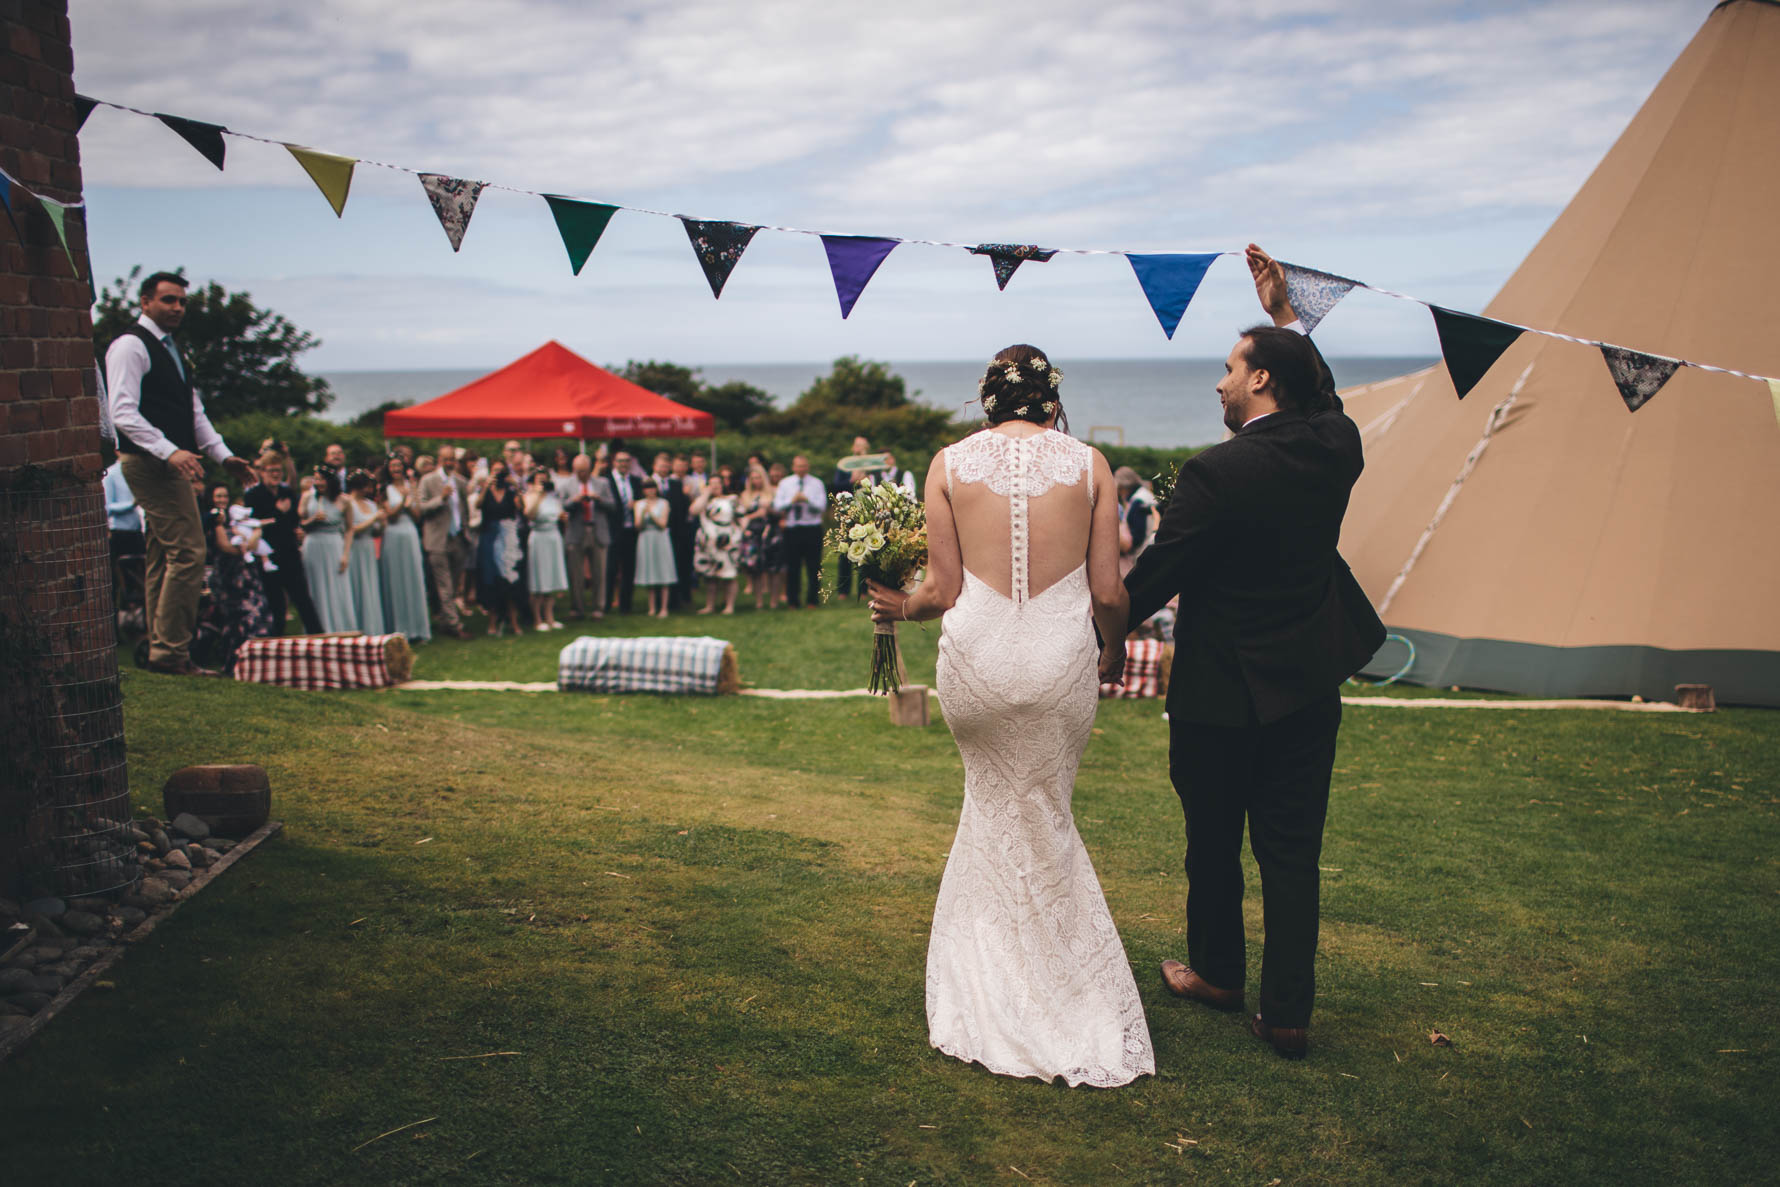 Bride and groom walking towards their wedding guests under a line of bunting which the groom is holding up to allow the couple to walk underneath. The bride and groom are walking away from the camera. There is a tipi to the right hand side of the shot